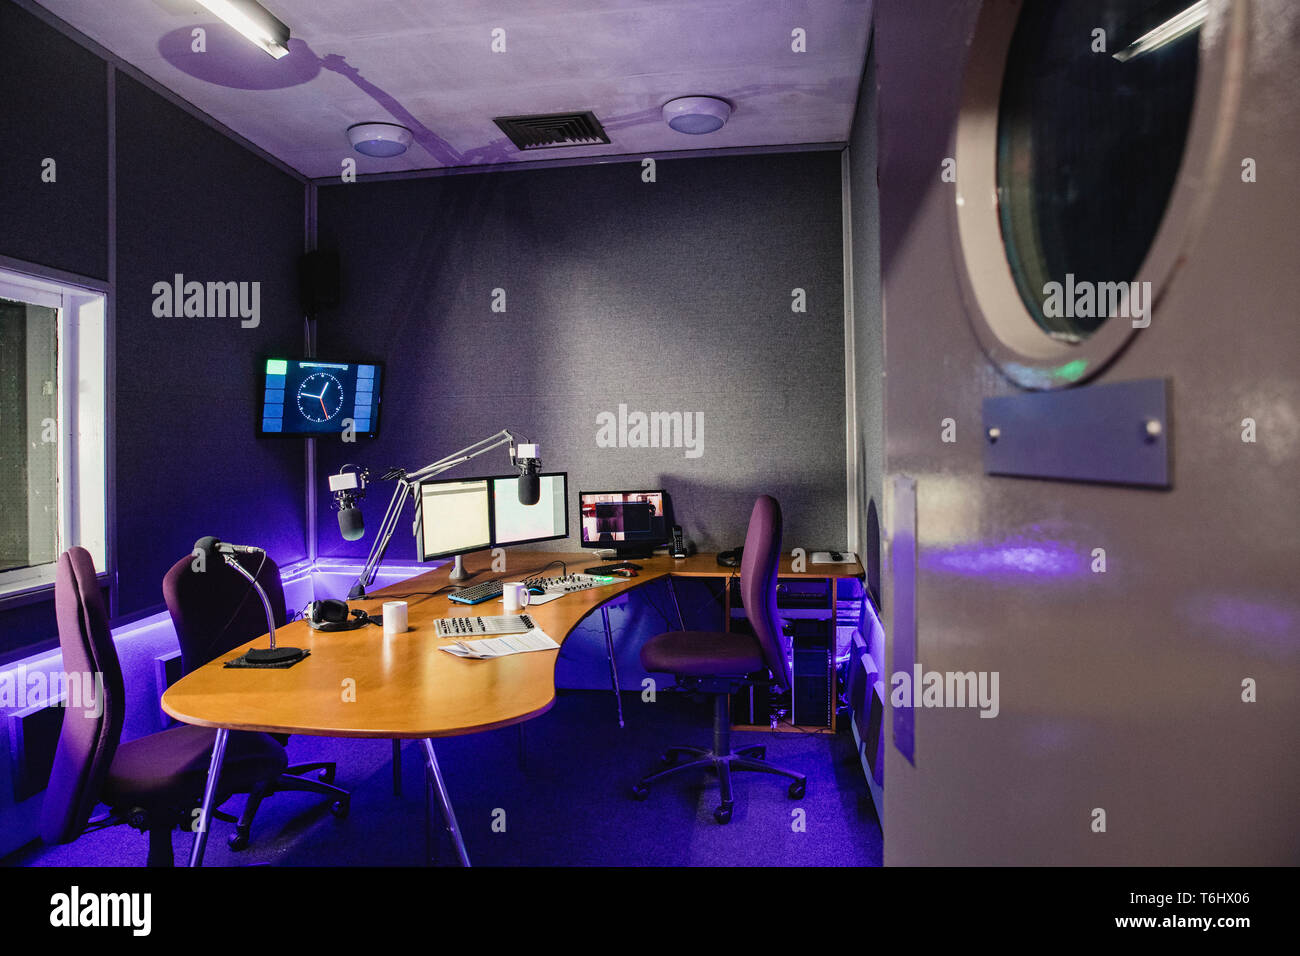 A Front View Shot Of A Radio Station Studio Interior A Large Desk